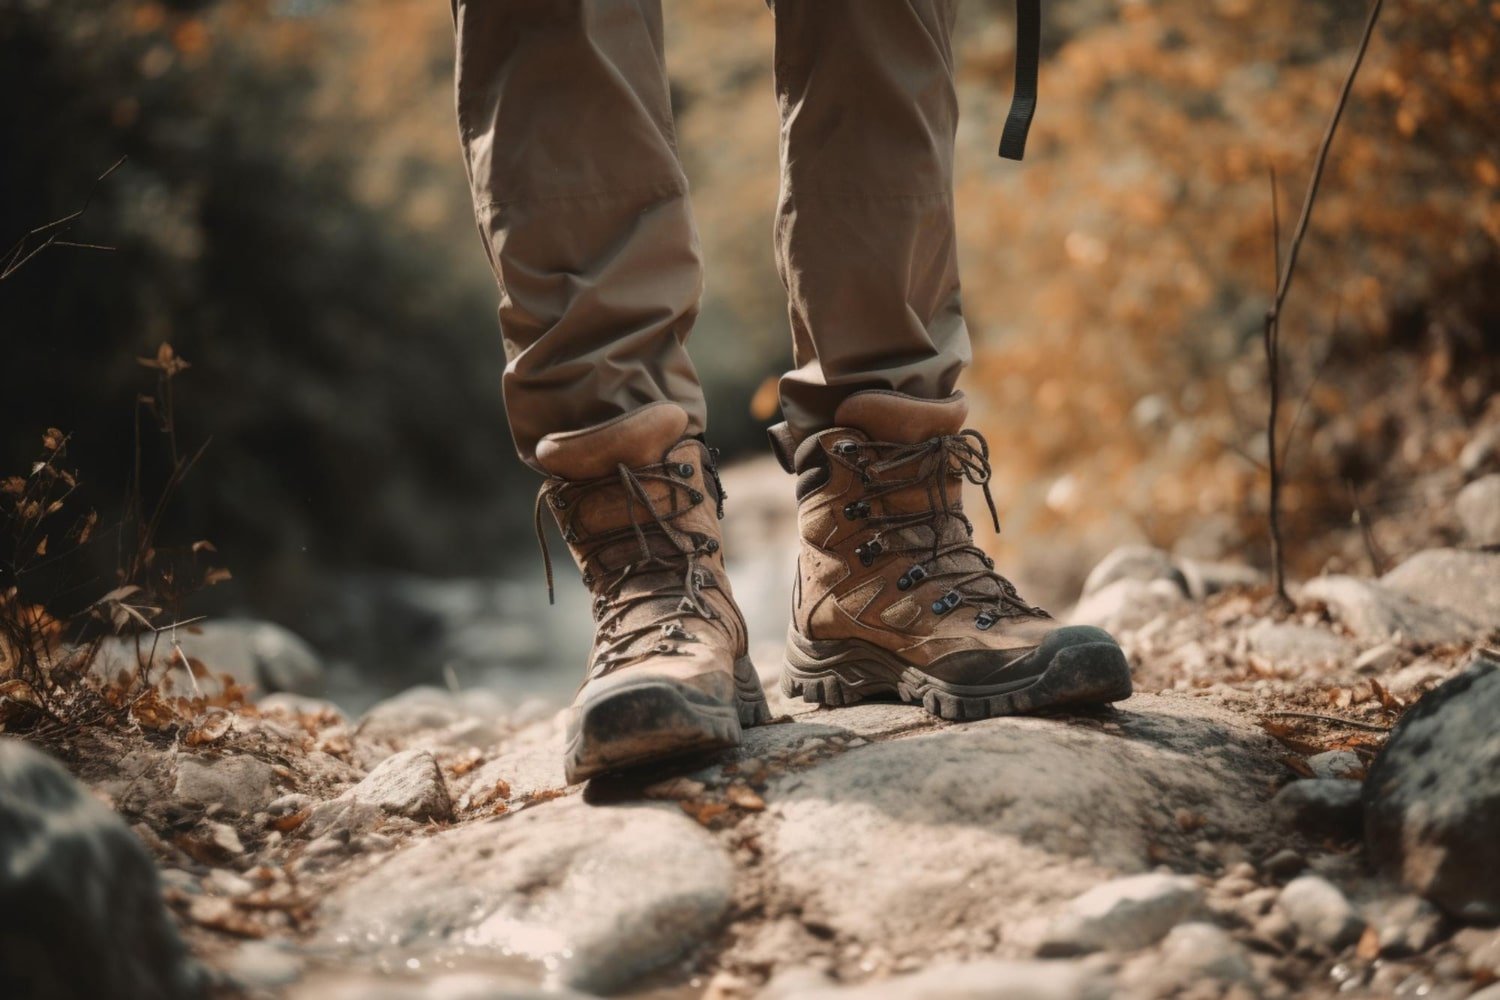 Blundstone Rugged Boots for Life’s Adventures